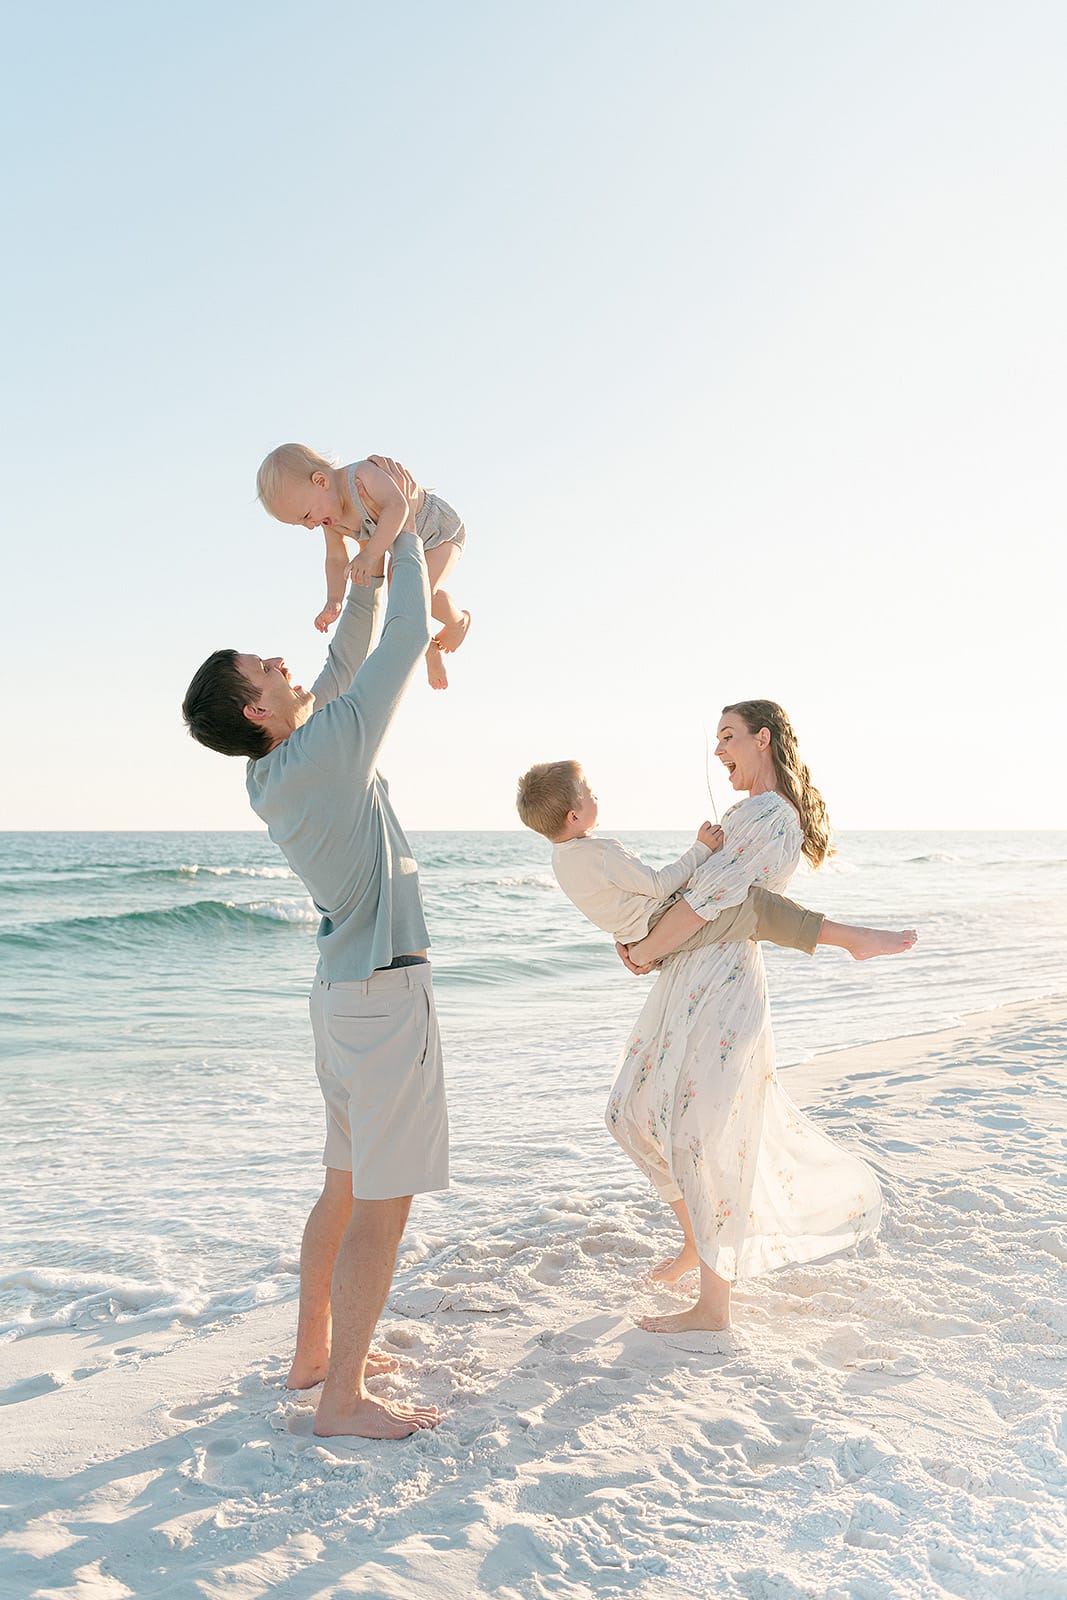 A family is playing on the beach with a baby in the air.